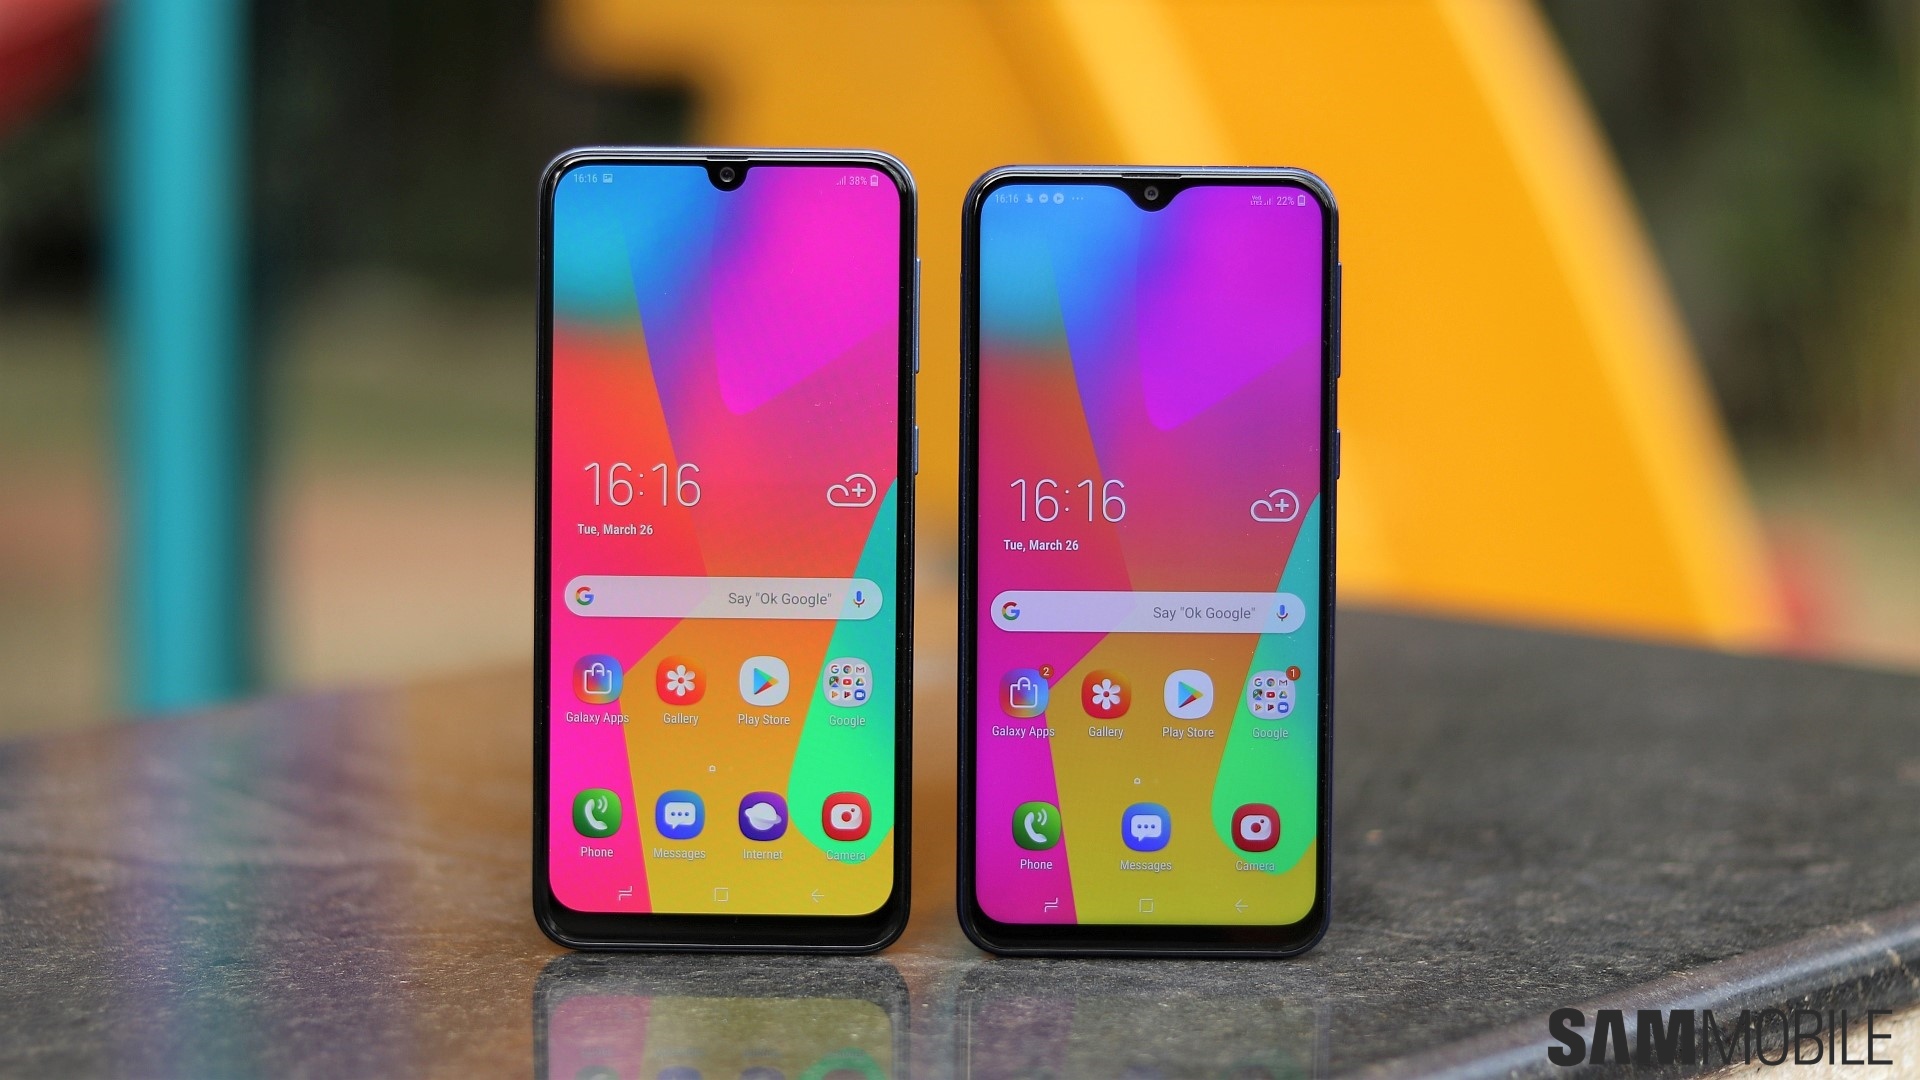 Download the official Galaxy M10 and Galaxy M20 wallpapers now! - SamMobile